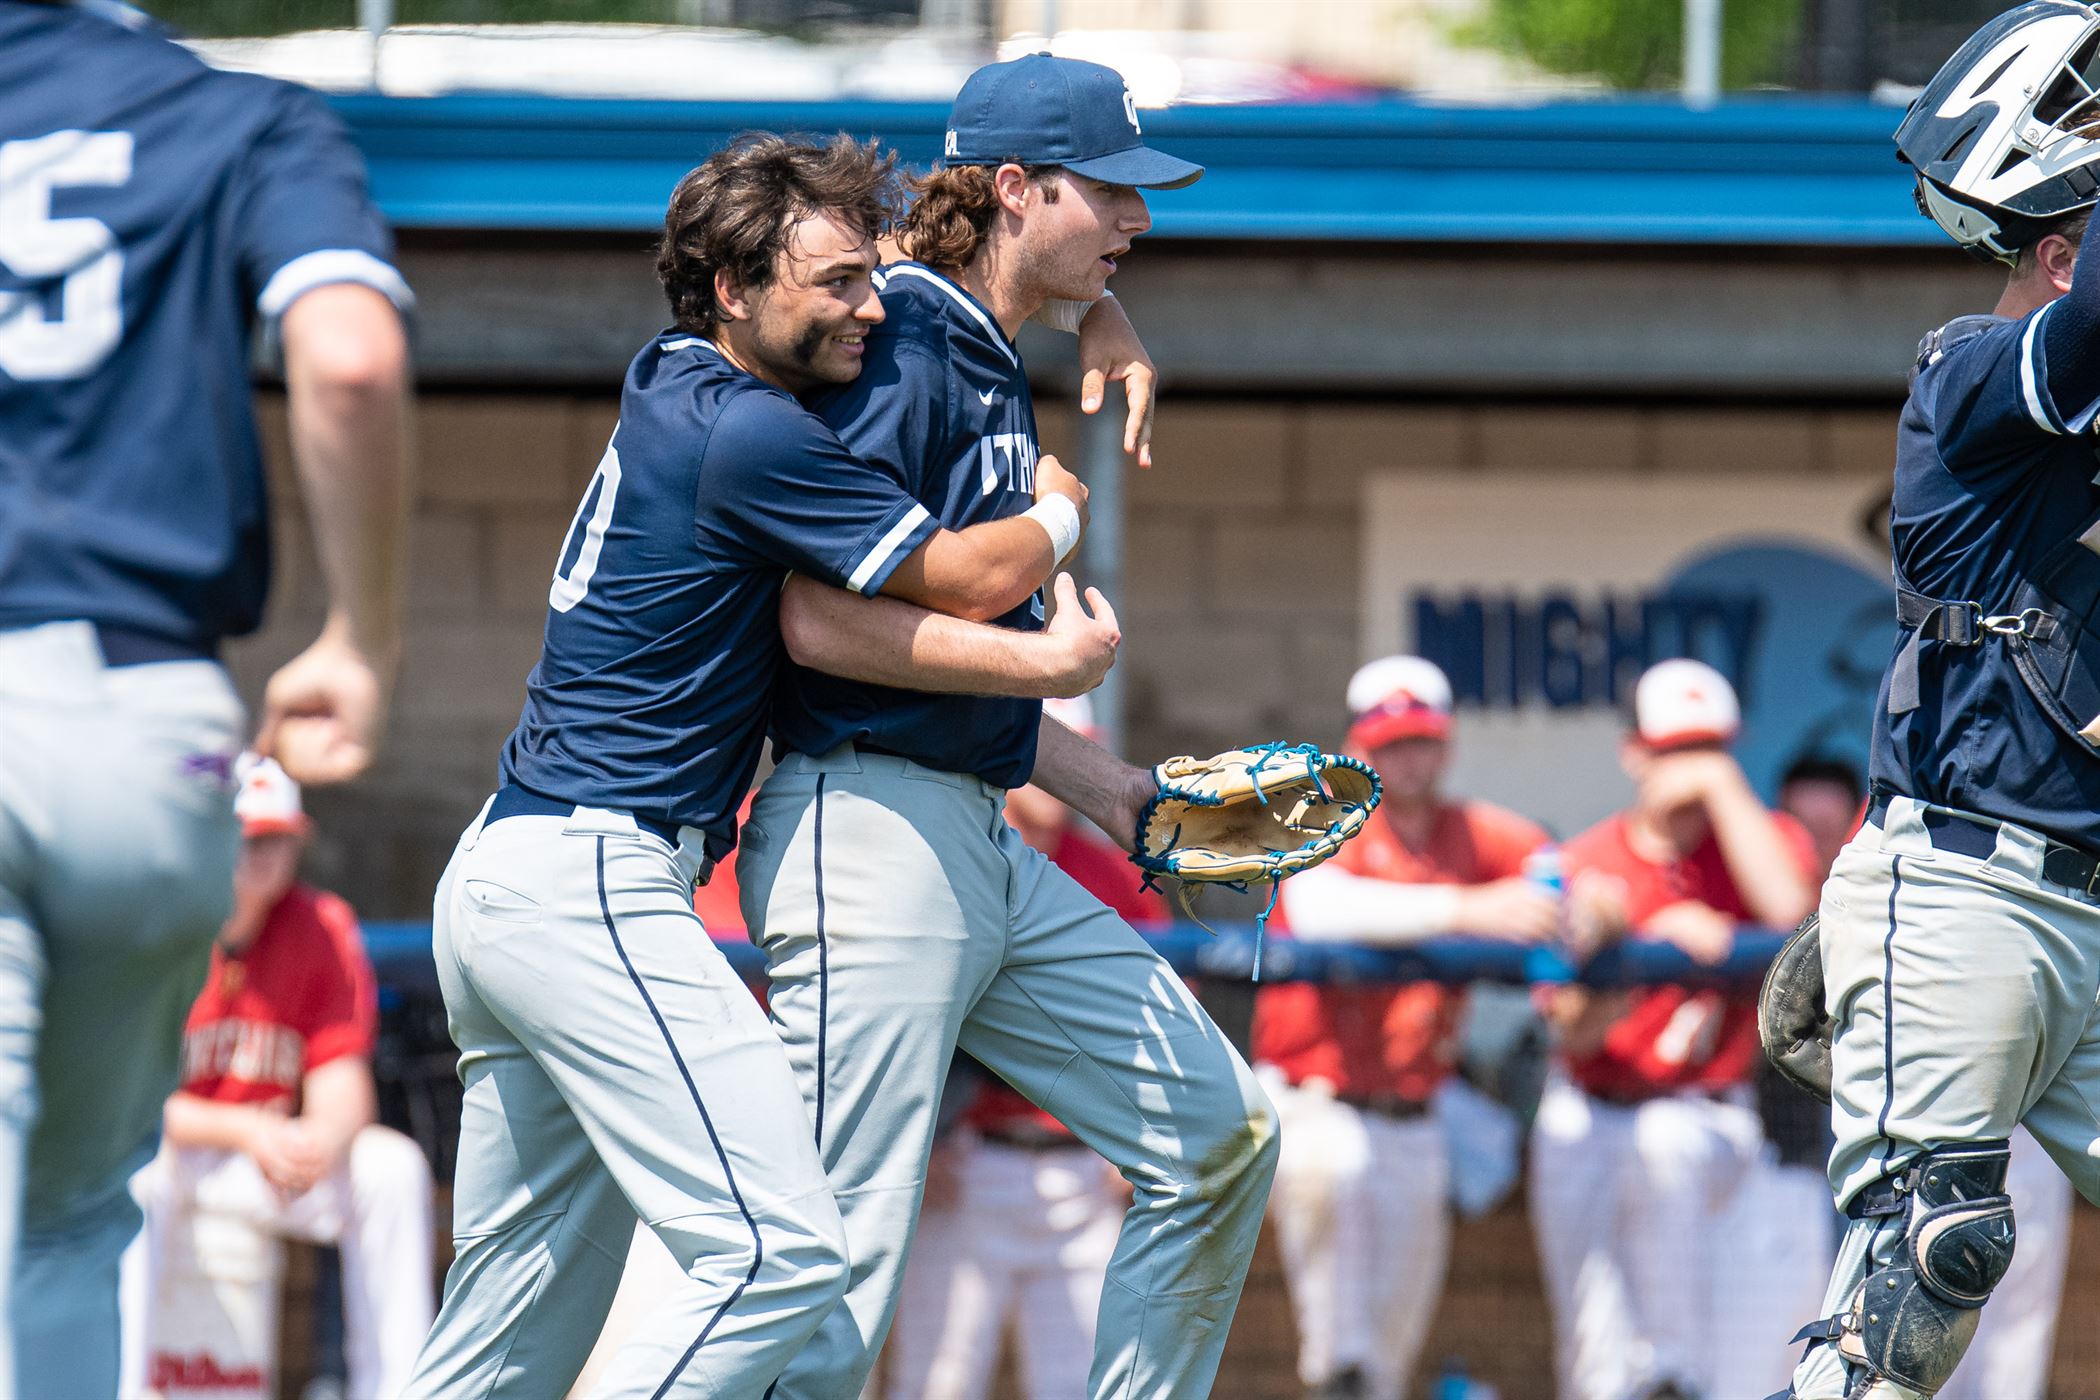 Ithaca was all smiles after the result of the game to advance in the NCAA Regionals. Spencer Honda | Keystone Athletics